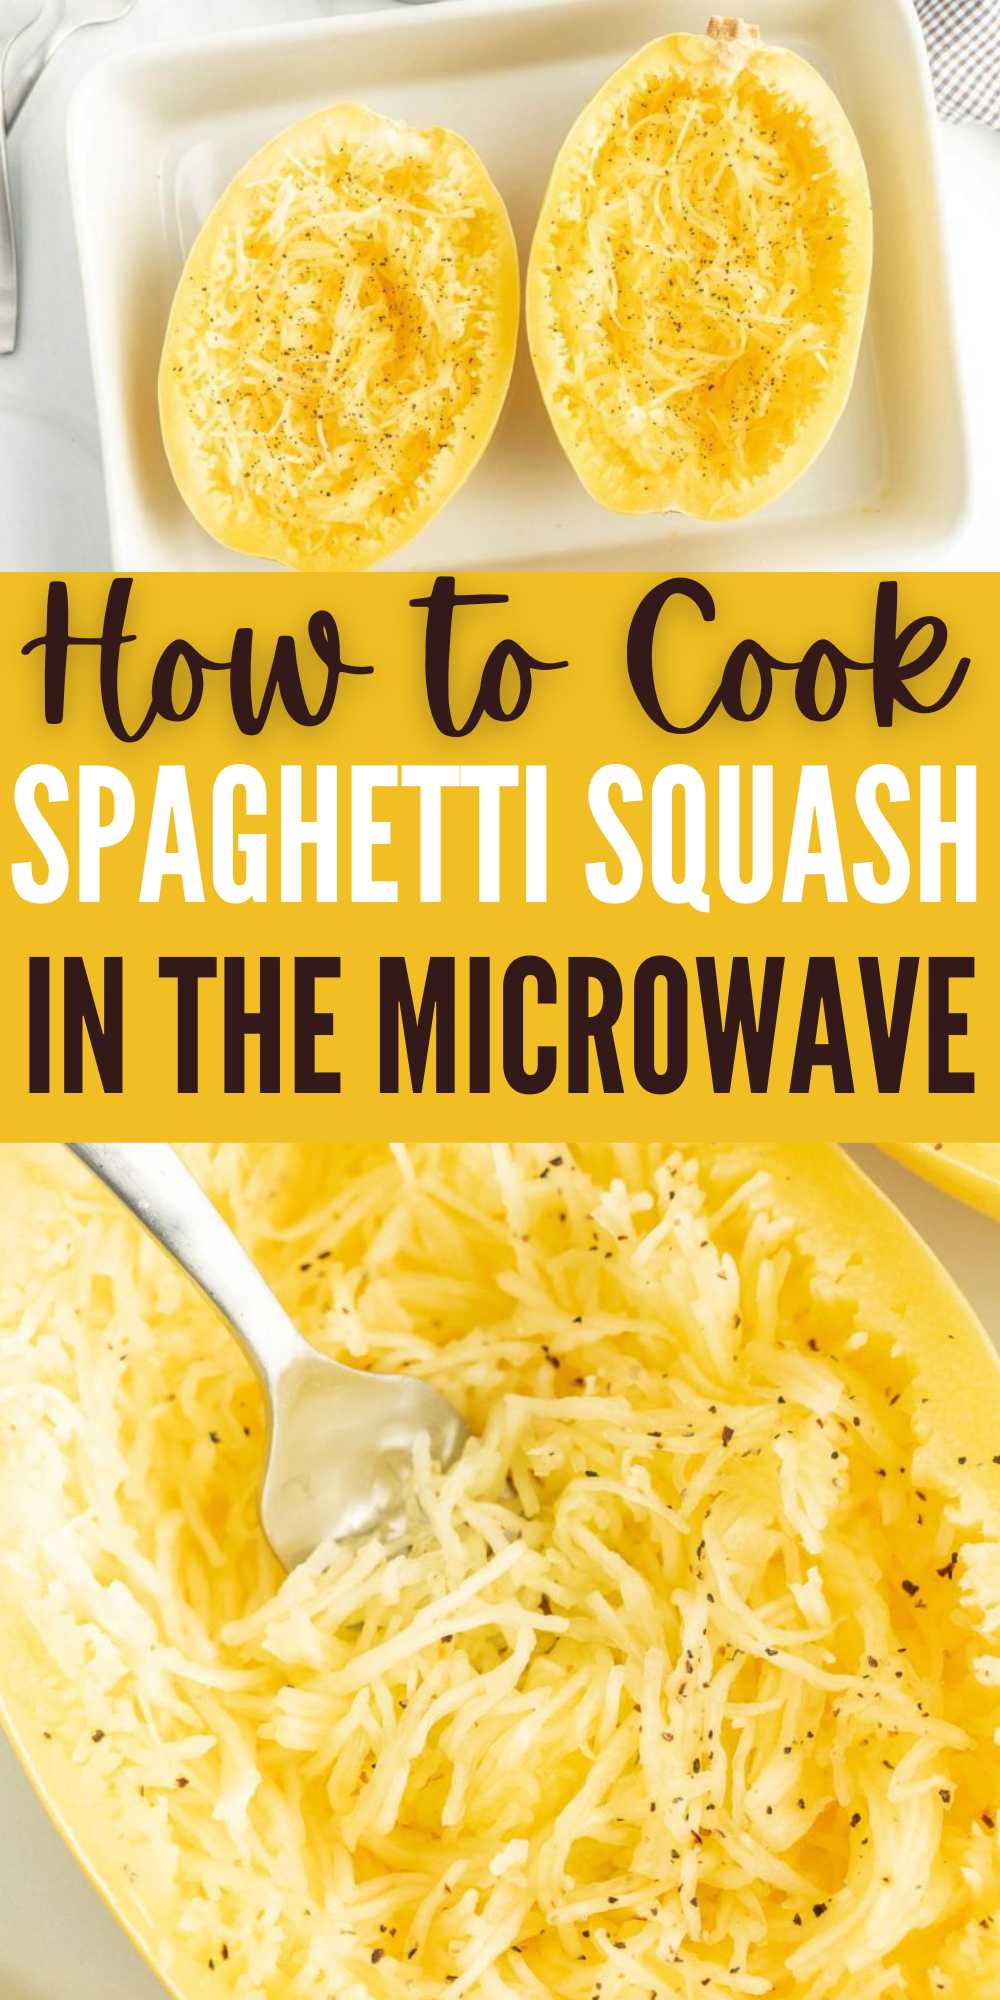 Learn How to Cook Spaghetti Squash in the Microwave with these easy steps. Turn a spaghetti squash into tender noodles for a tasty side dish. If you are looking for an easy way to make your favorite yellow vegetable, make it in the microwave. The results are tender, cooked strands of squash that is cooked perfectly. #eatingonadime #howtocookspaghettisquashinthemicrowave #microwavespaghettisquash